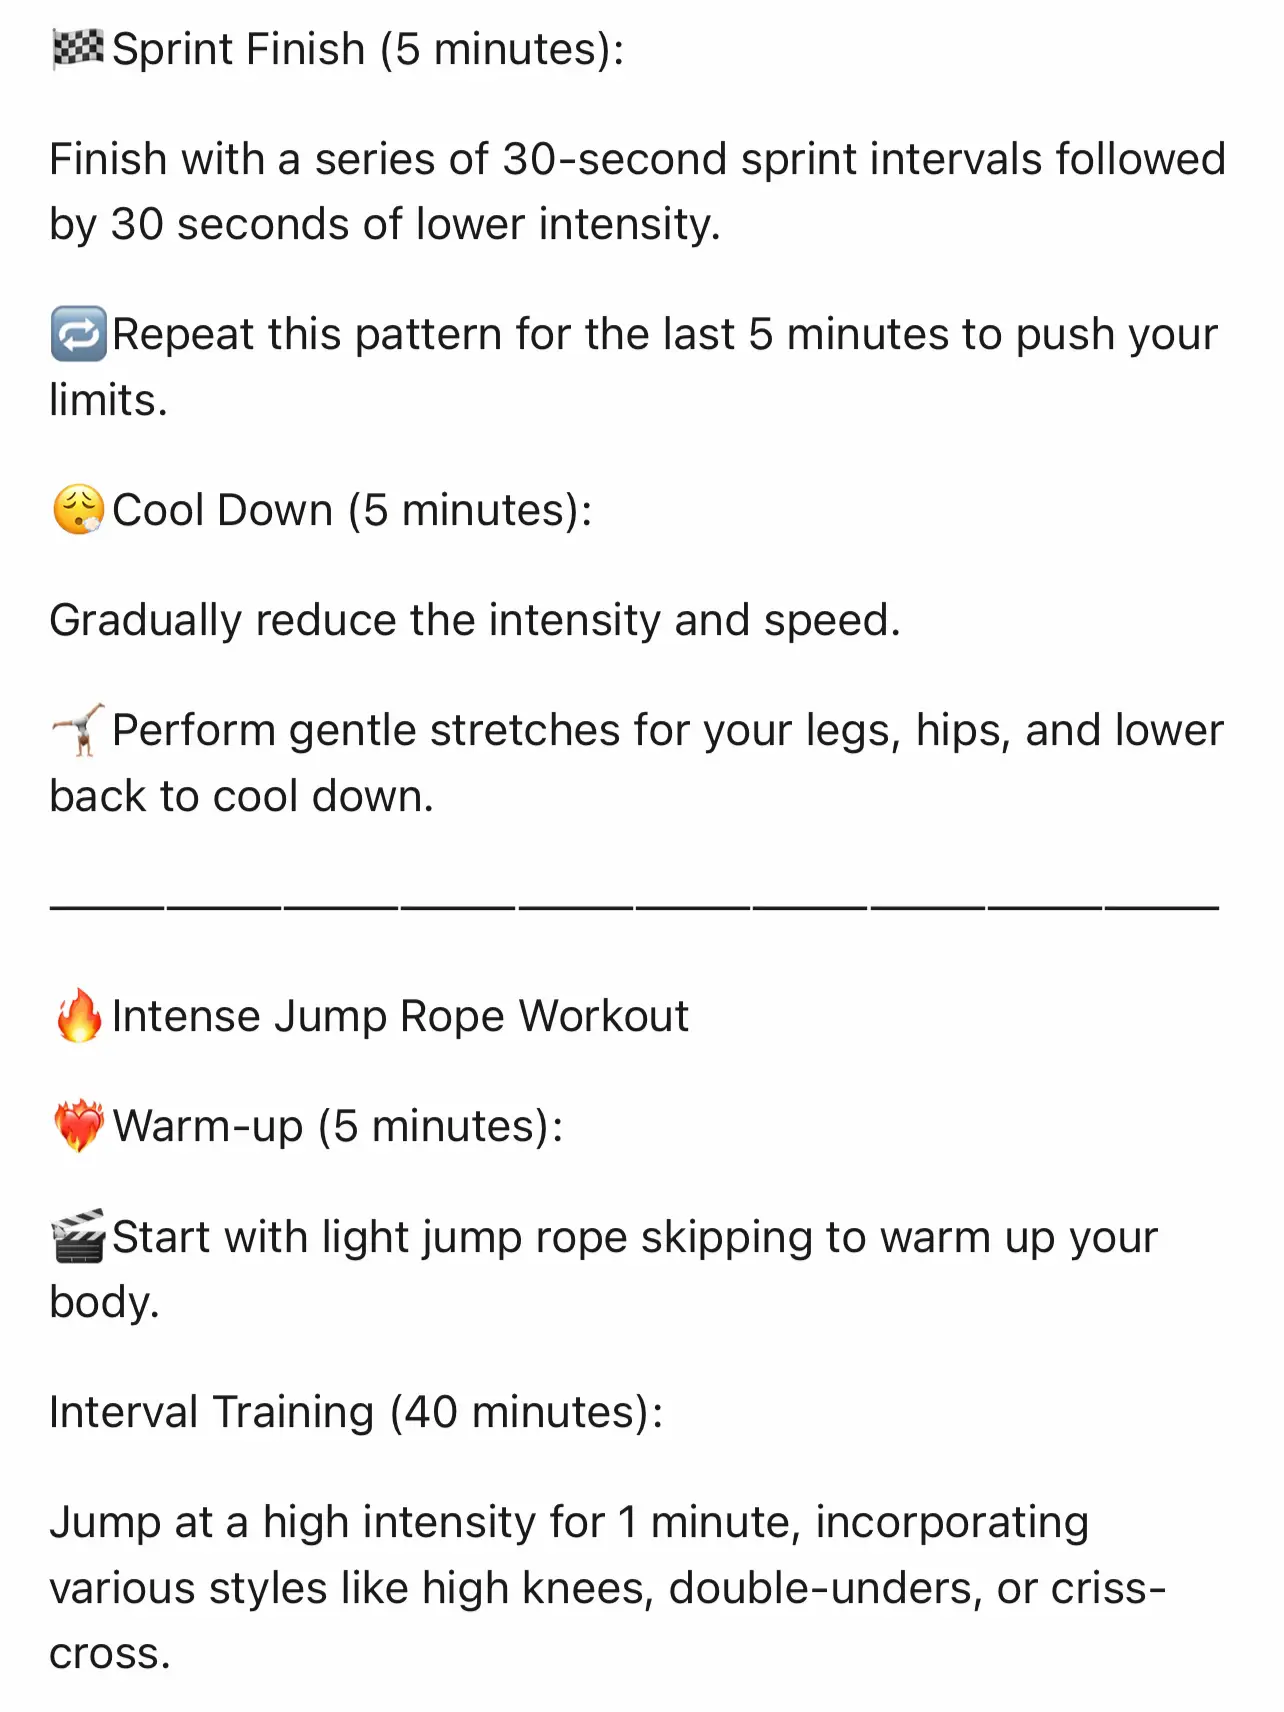 Day 1 #levelup - 30 MIN HIIT Workout, KILLER No Repeat - Exercises